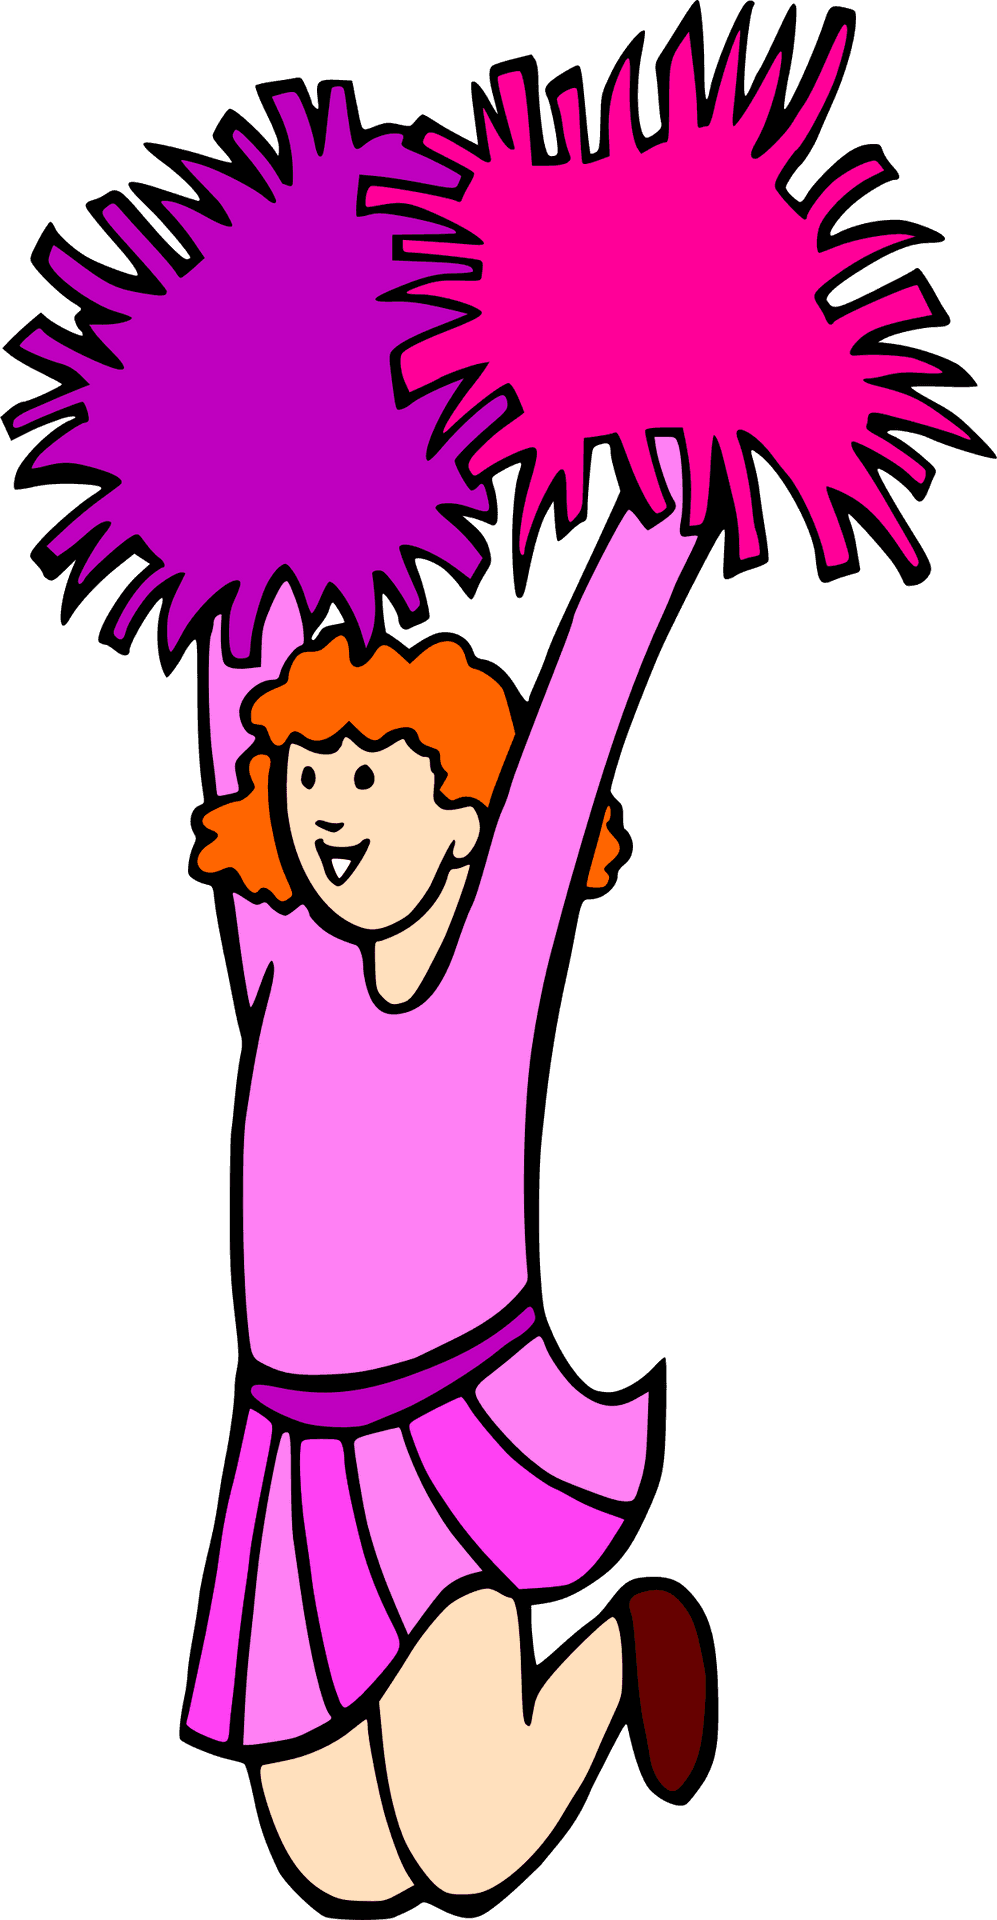 Animated Cheerleader Jumping With Pom Poms PNG